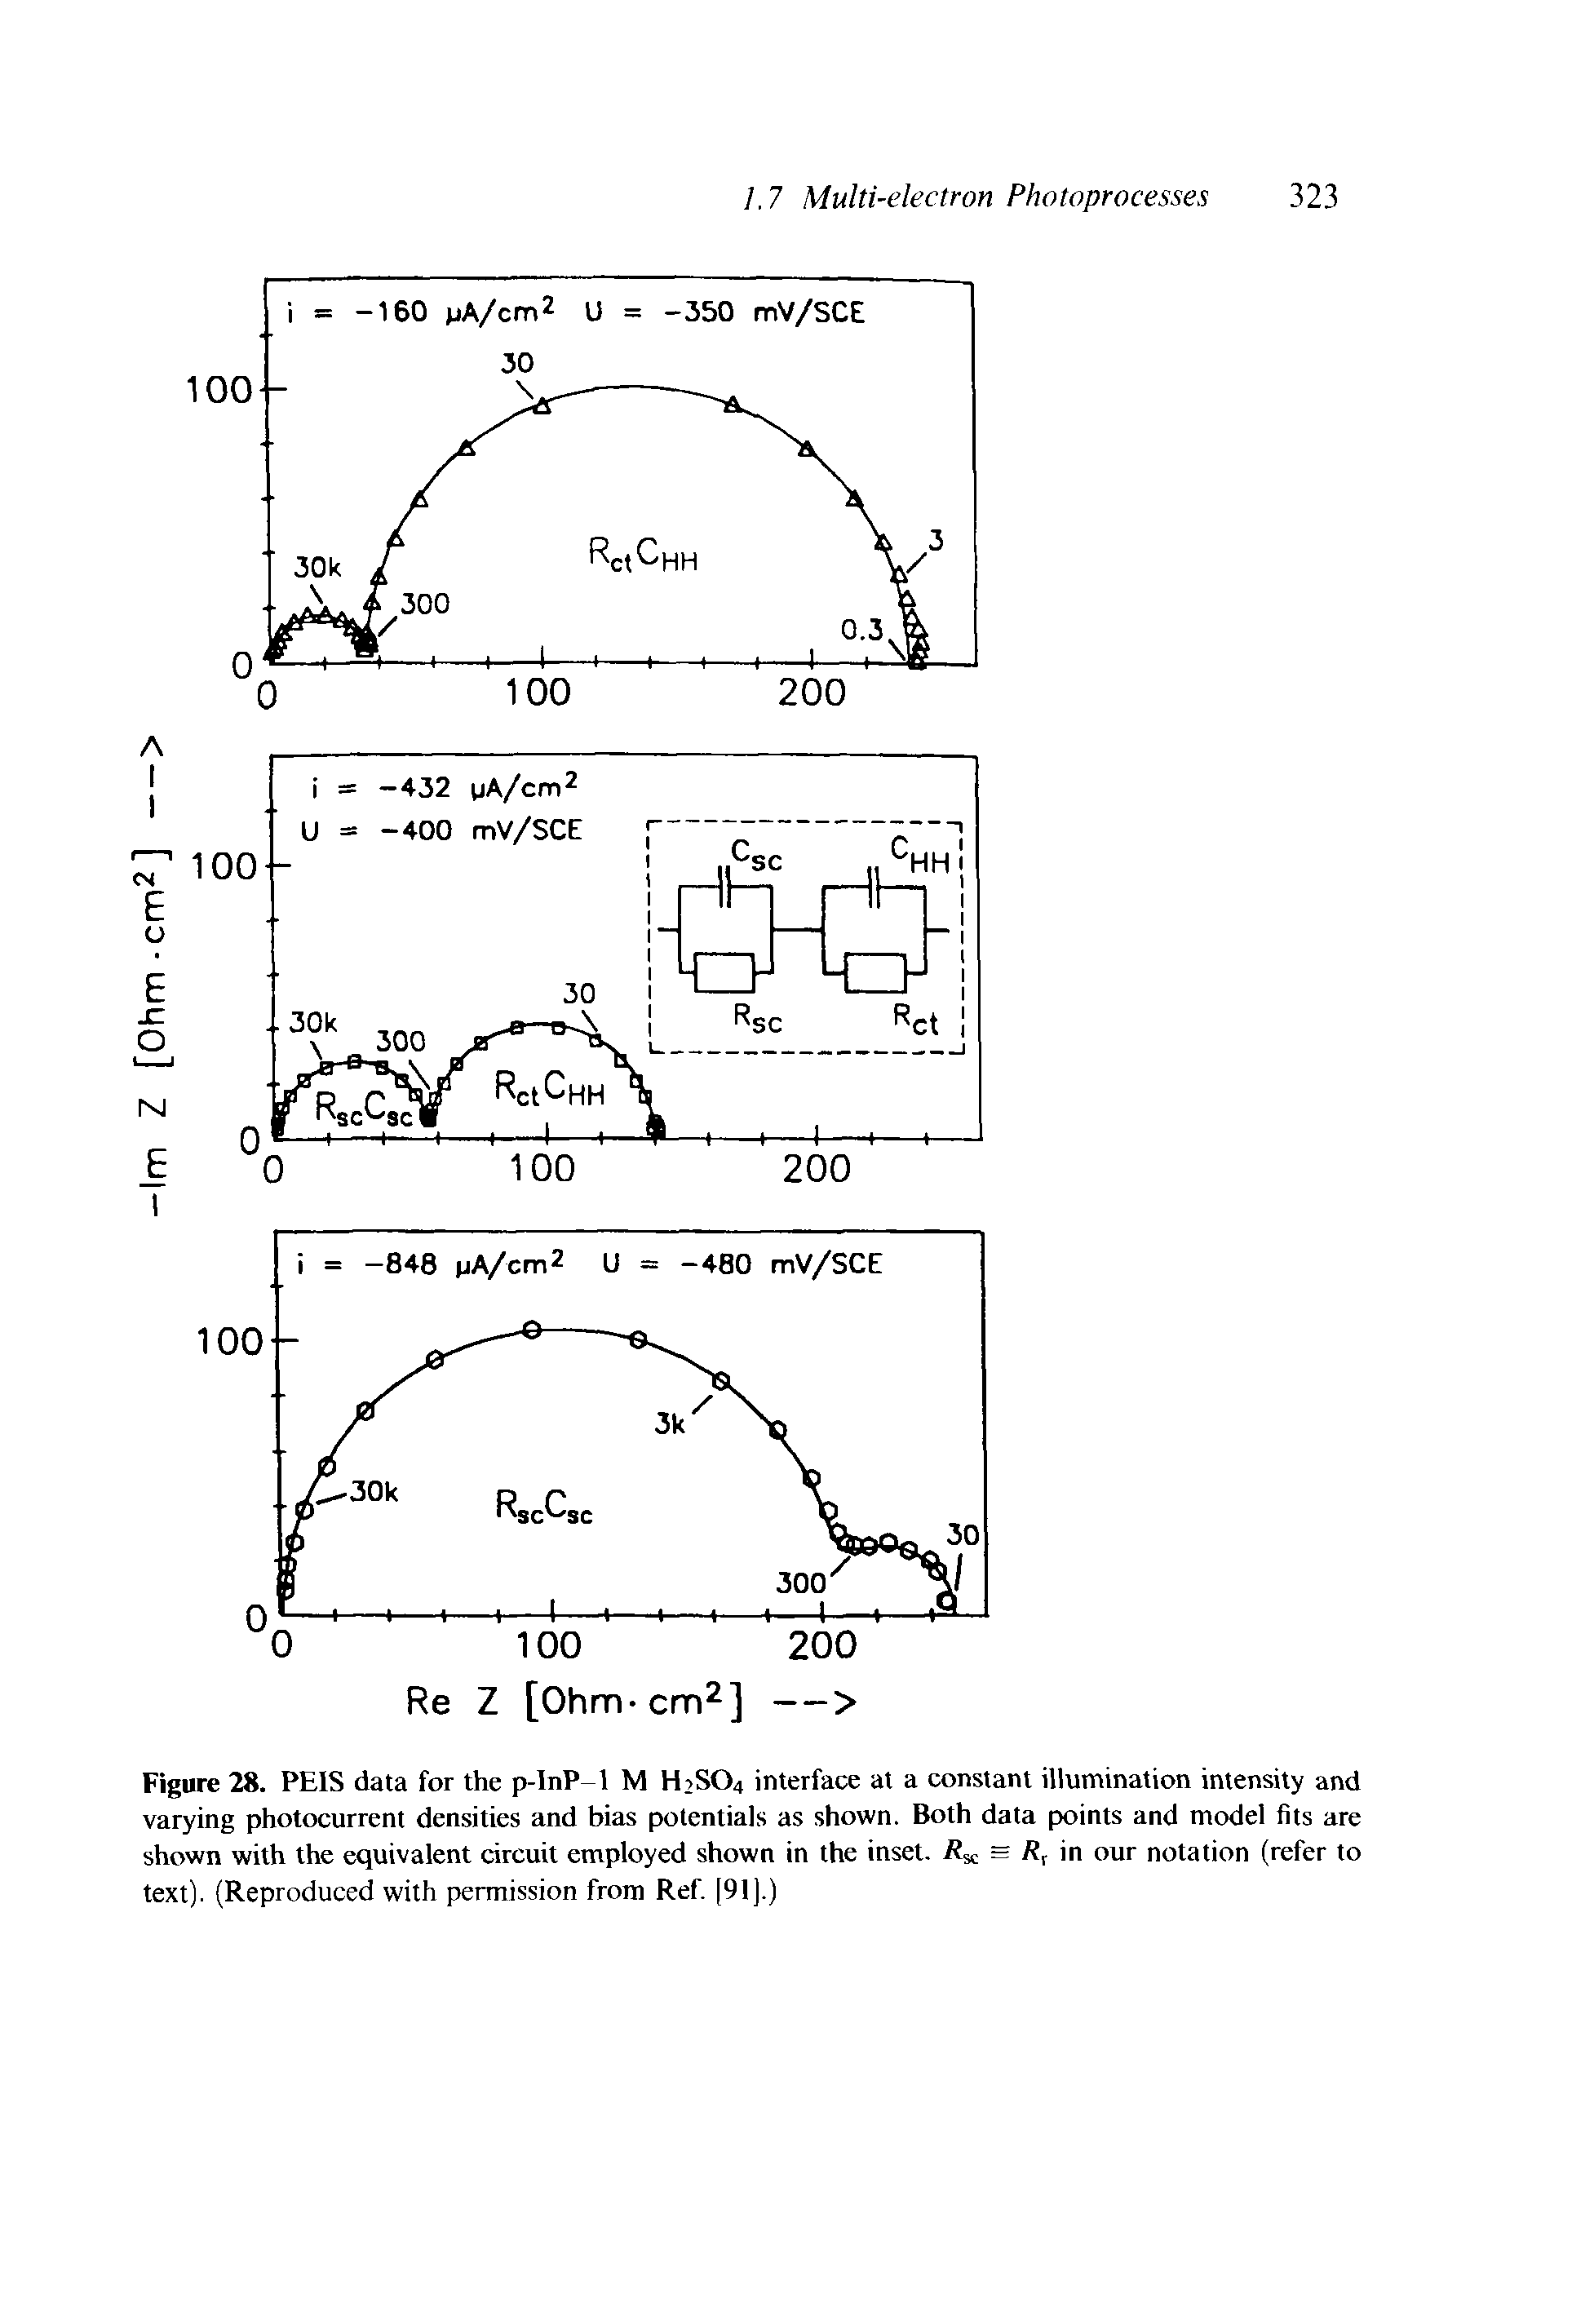 Figure 28. PEIS data for the p-InP-1 M H2SO4 interface at a constant illumination intensity and varying photocurrent densities and bias potentials as shown. Both data points and model fits are shown with the equivalent circuit employed shown in the inset. R, in our notation (refer to text). (Reproduced with permission from Ref. [91).)...